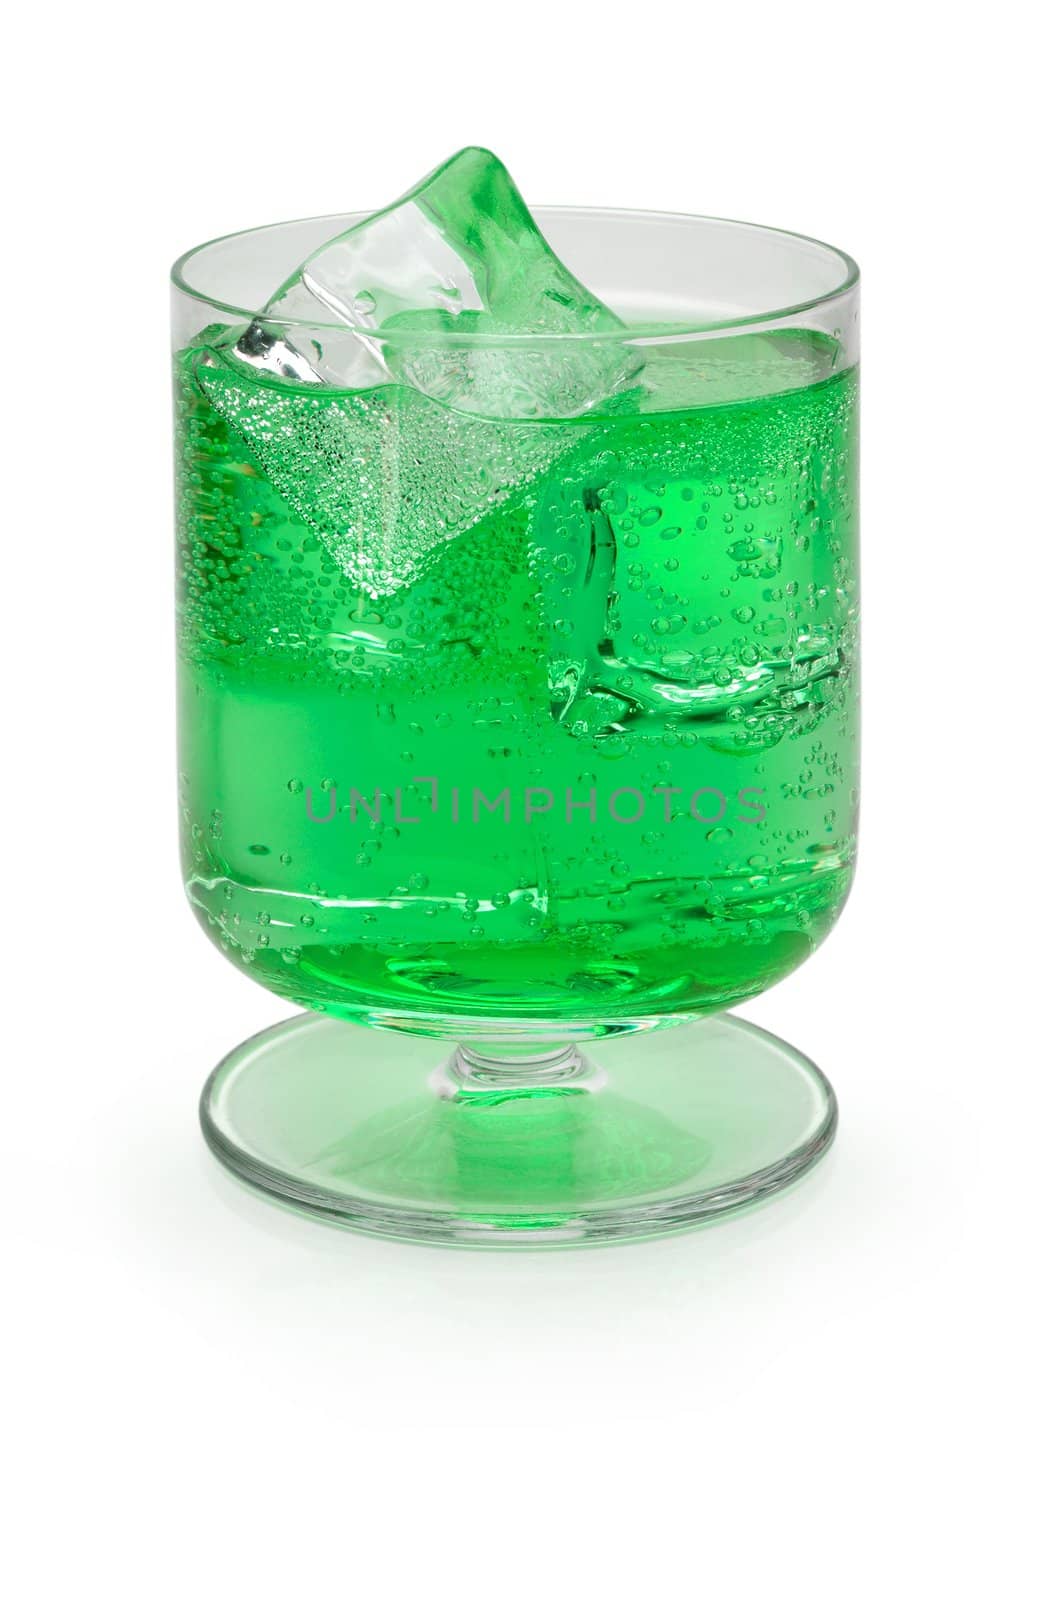 Mint  drink with ice cubes  (b3) with clipping path by Laborer